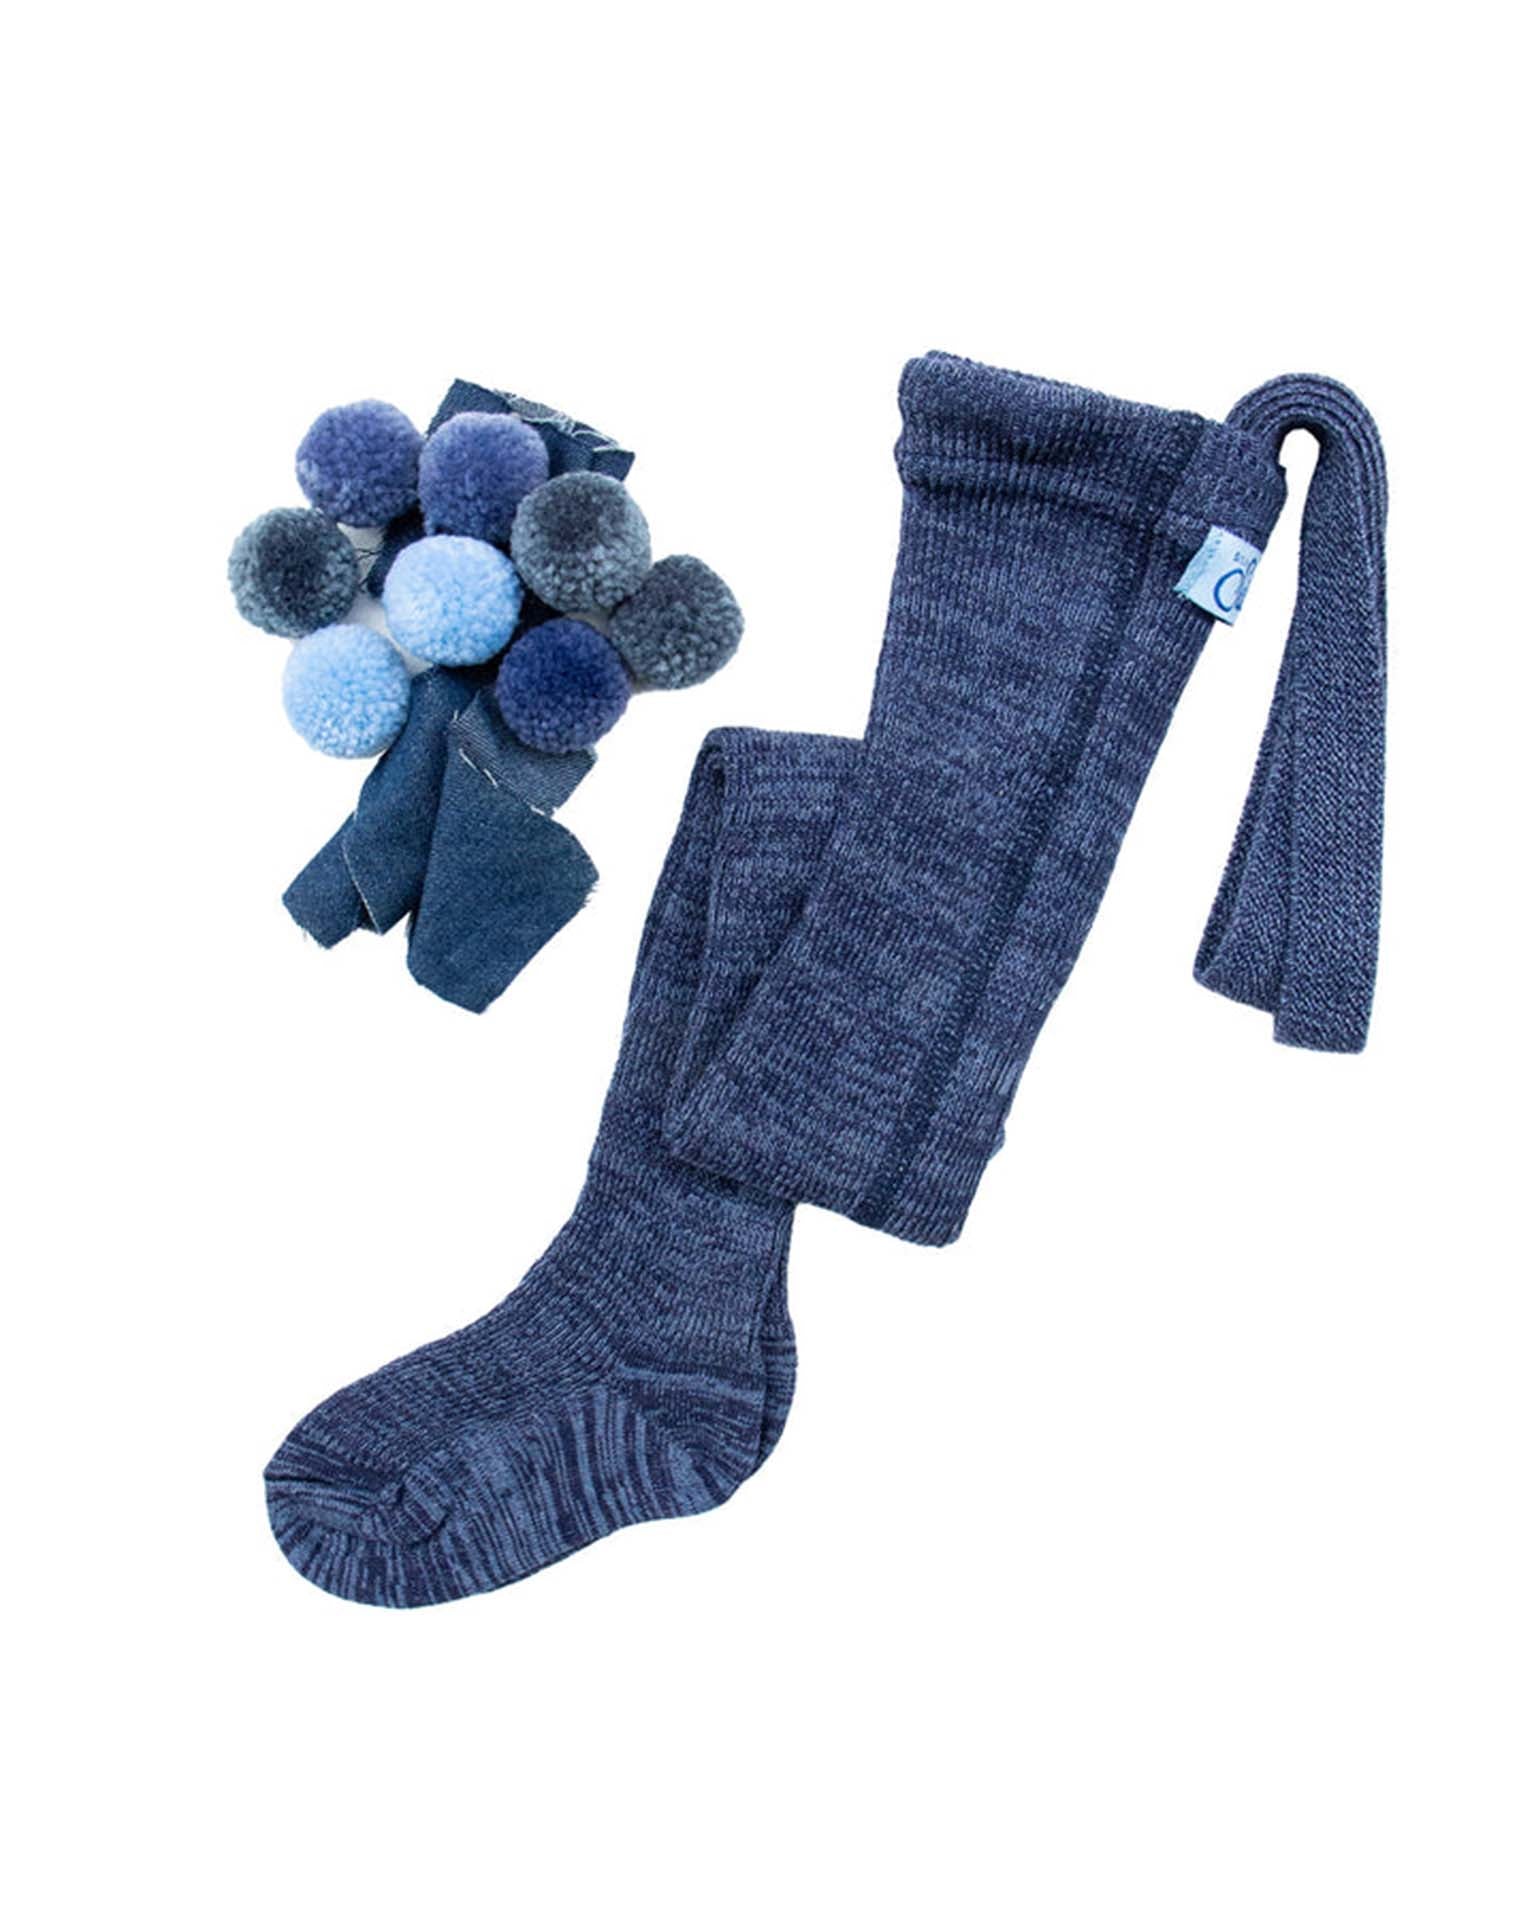 Little silly silas accessories retro footed tights in denim